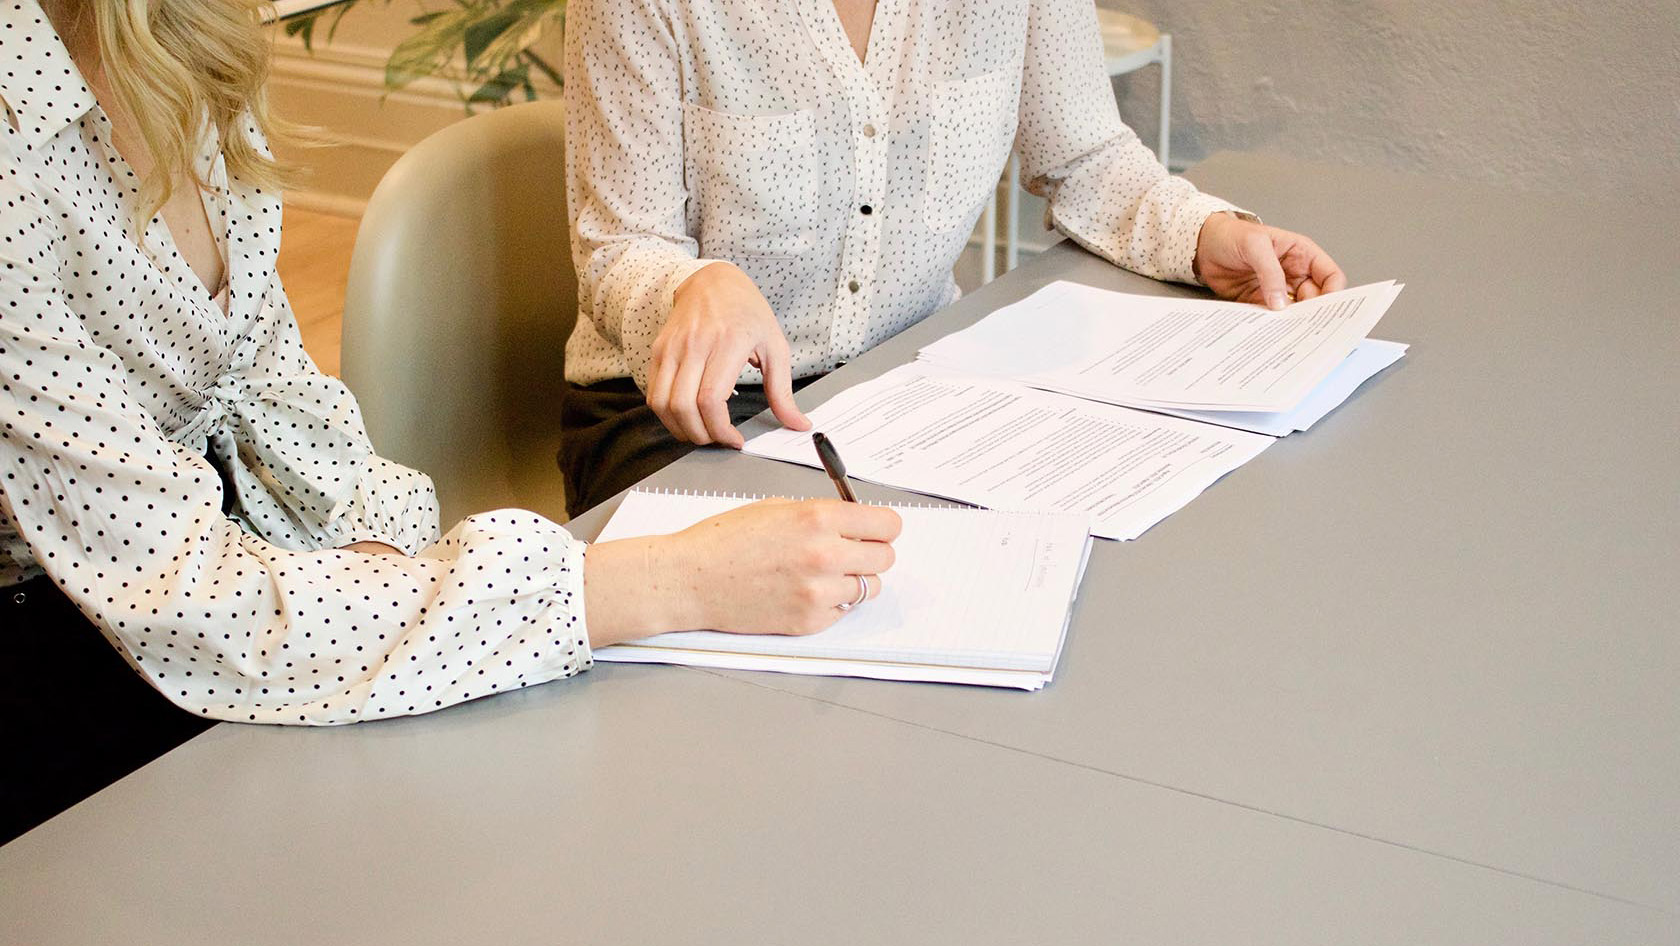 Image of two people looking at paperwork